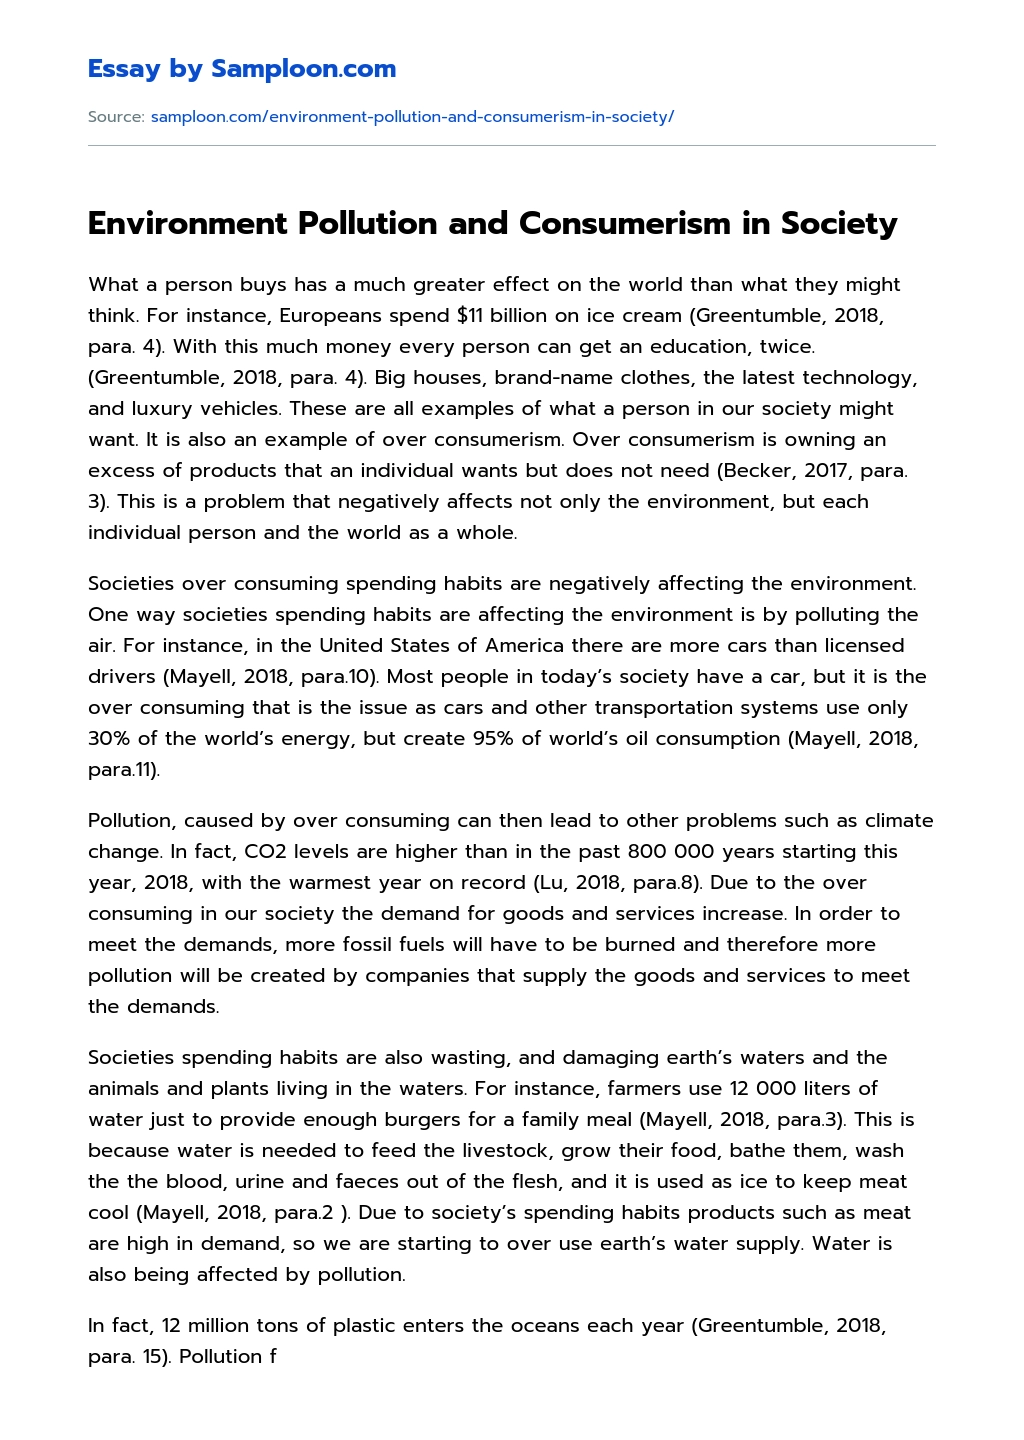 Environment Pollution and Consumerism in Society essay